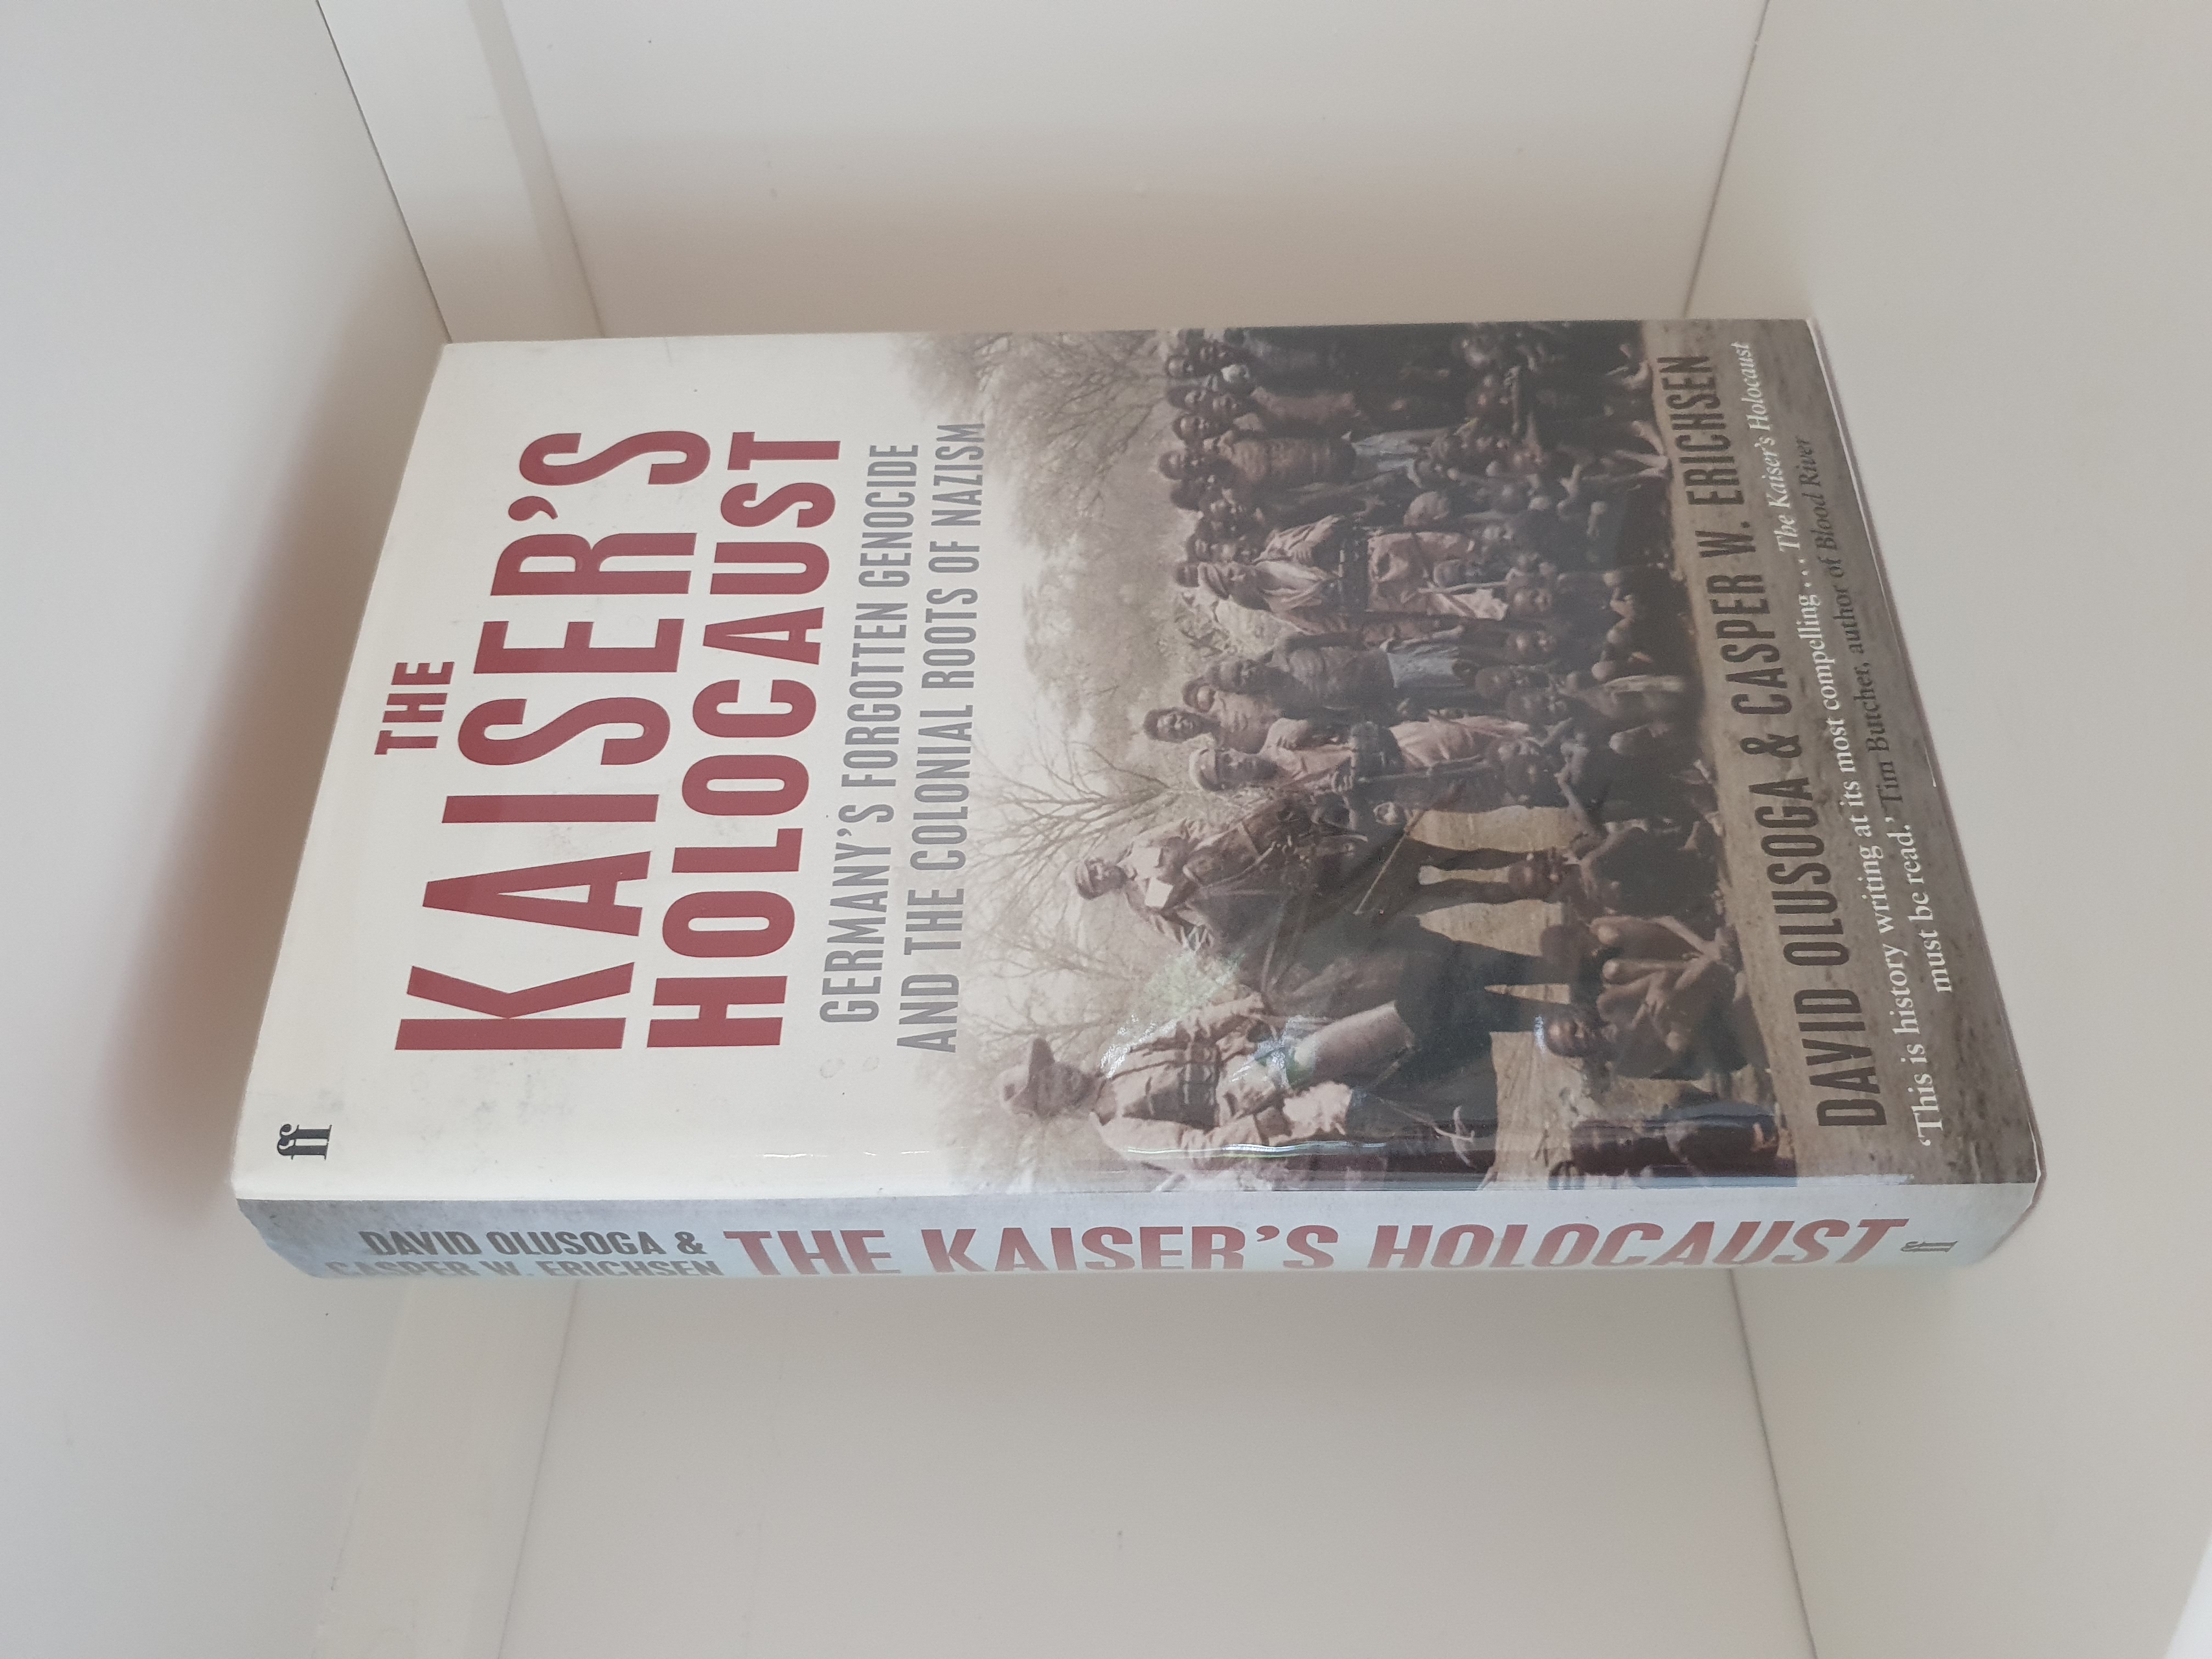 The Kaiser's Holocaust: Germany's Forgotten Genocide and the Colonial Roots of Nazism - David Olusoga & Casper W. Erichsen